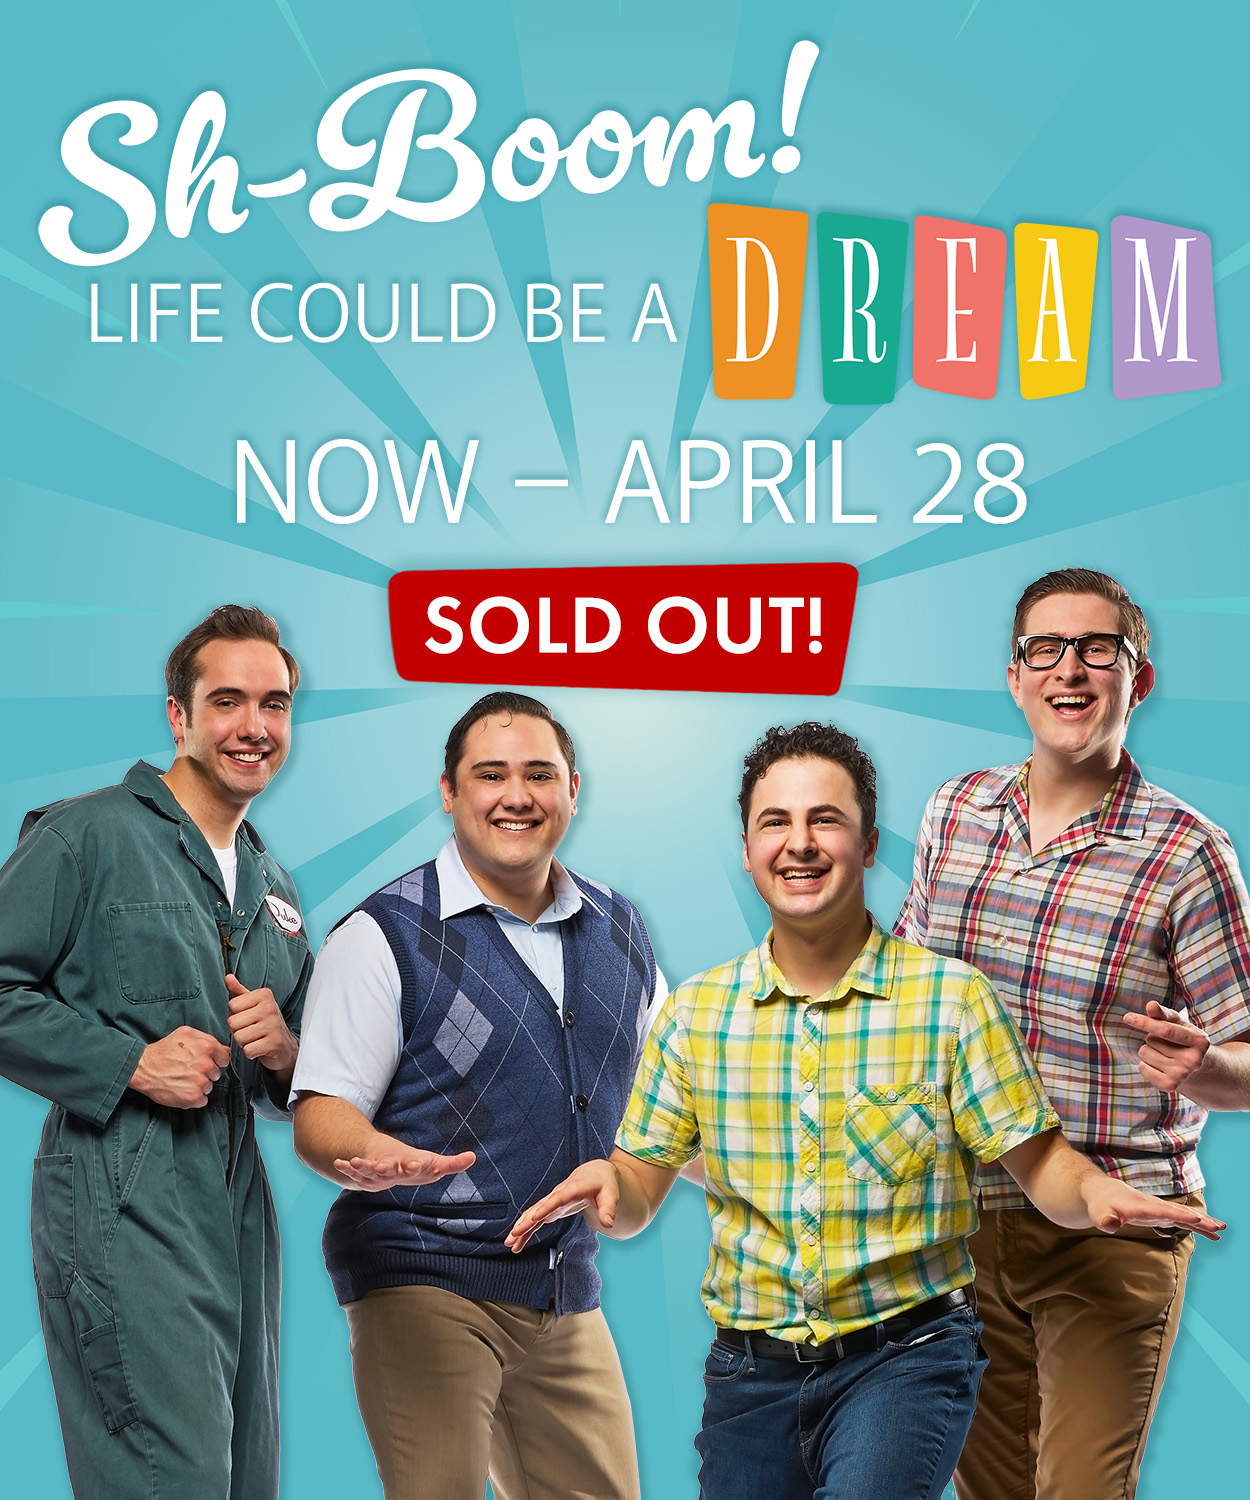 Sh-Boom is sold out.